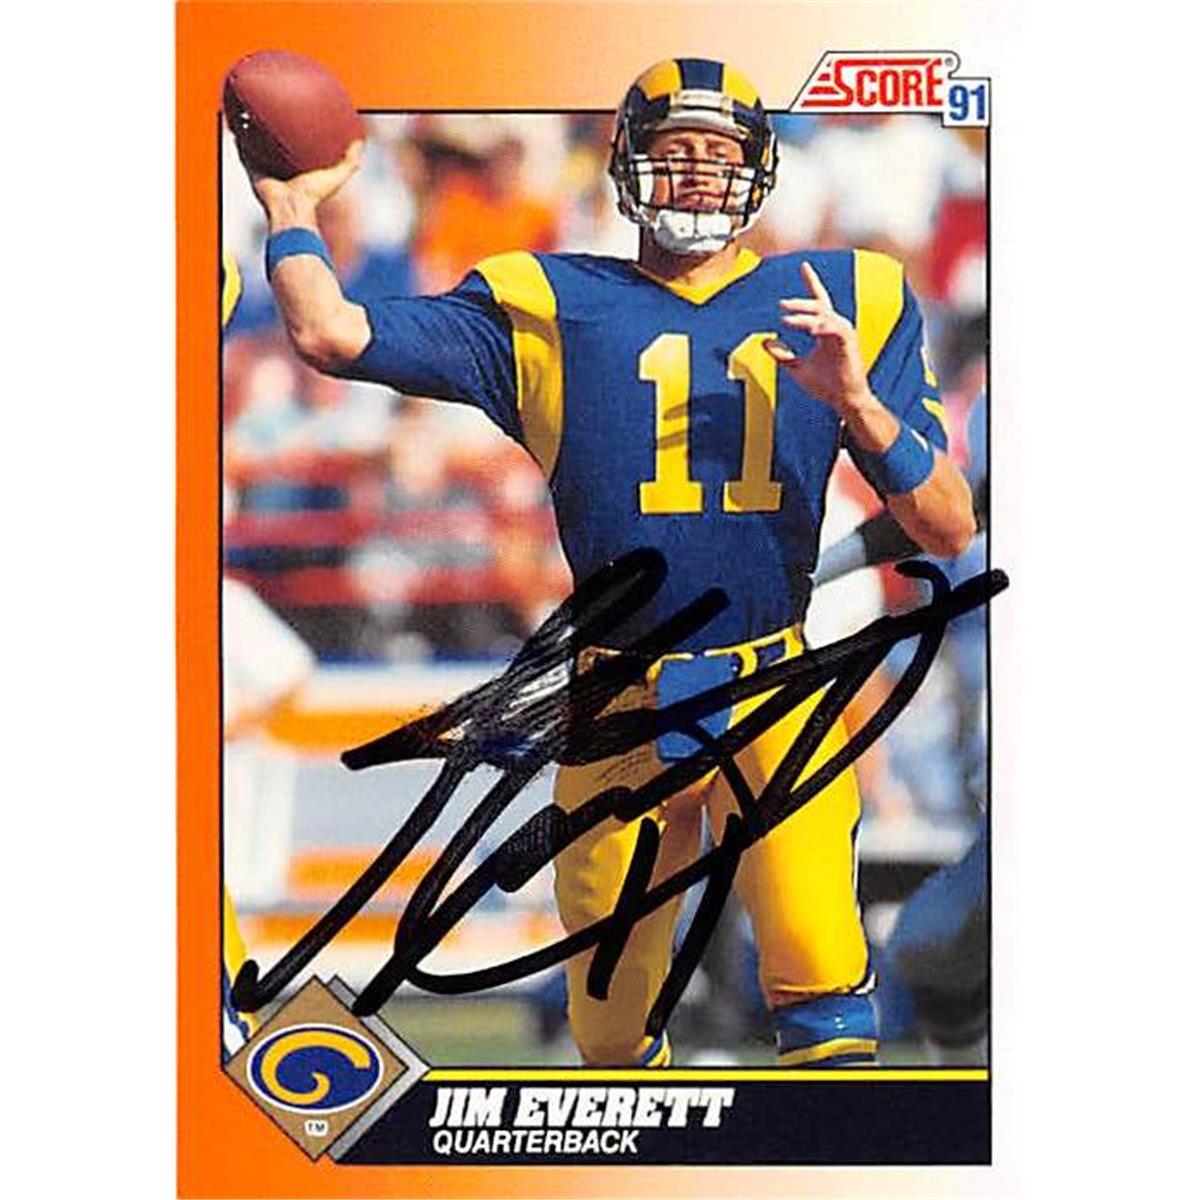 Picture of Autograph Warehouse 444714 Los Angeles Rams 1991 Score 367 Jim Everett Autographed Football Card